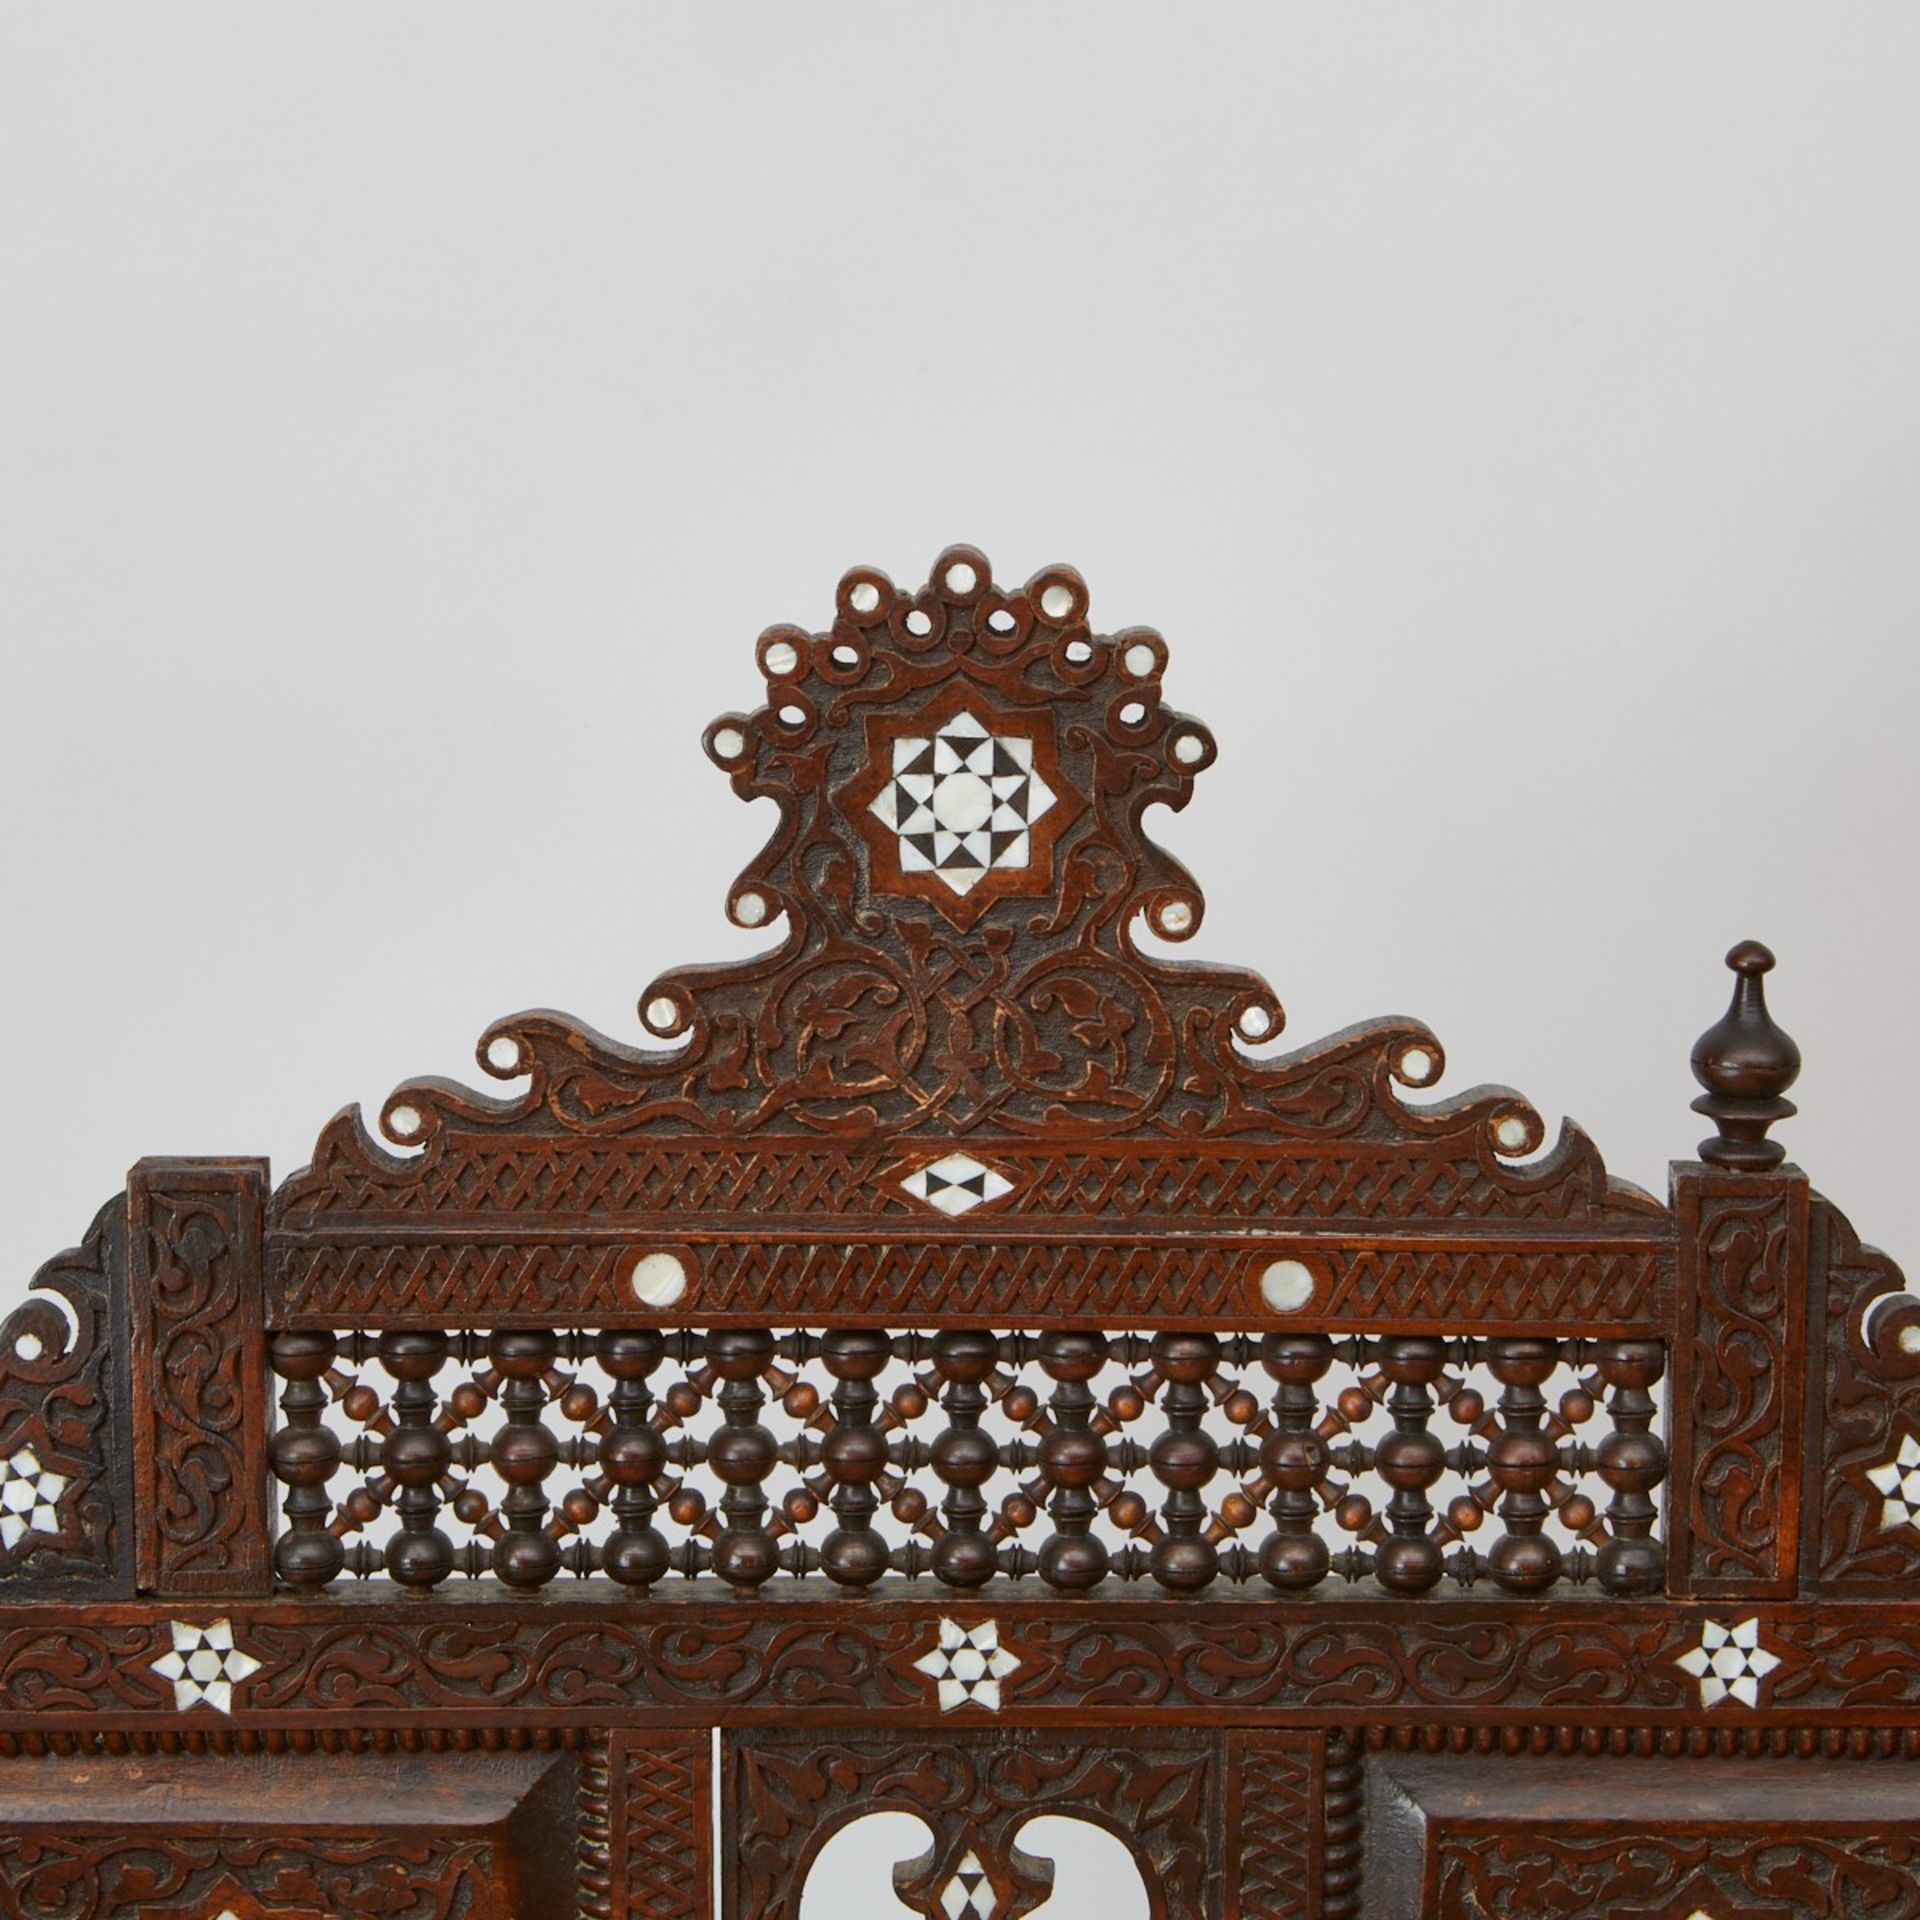 Syrian Mother of Pearl Inlaid Armchair - Image 8 of 8